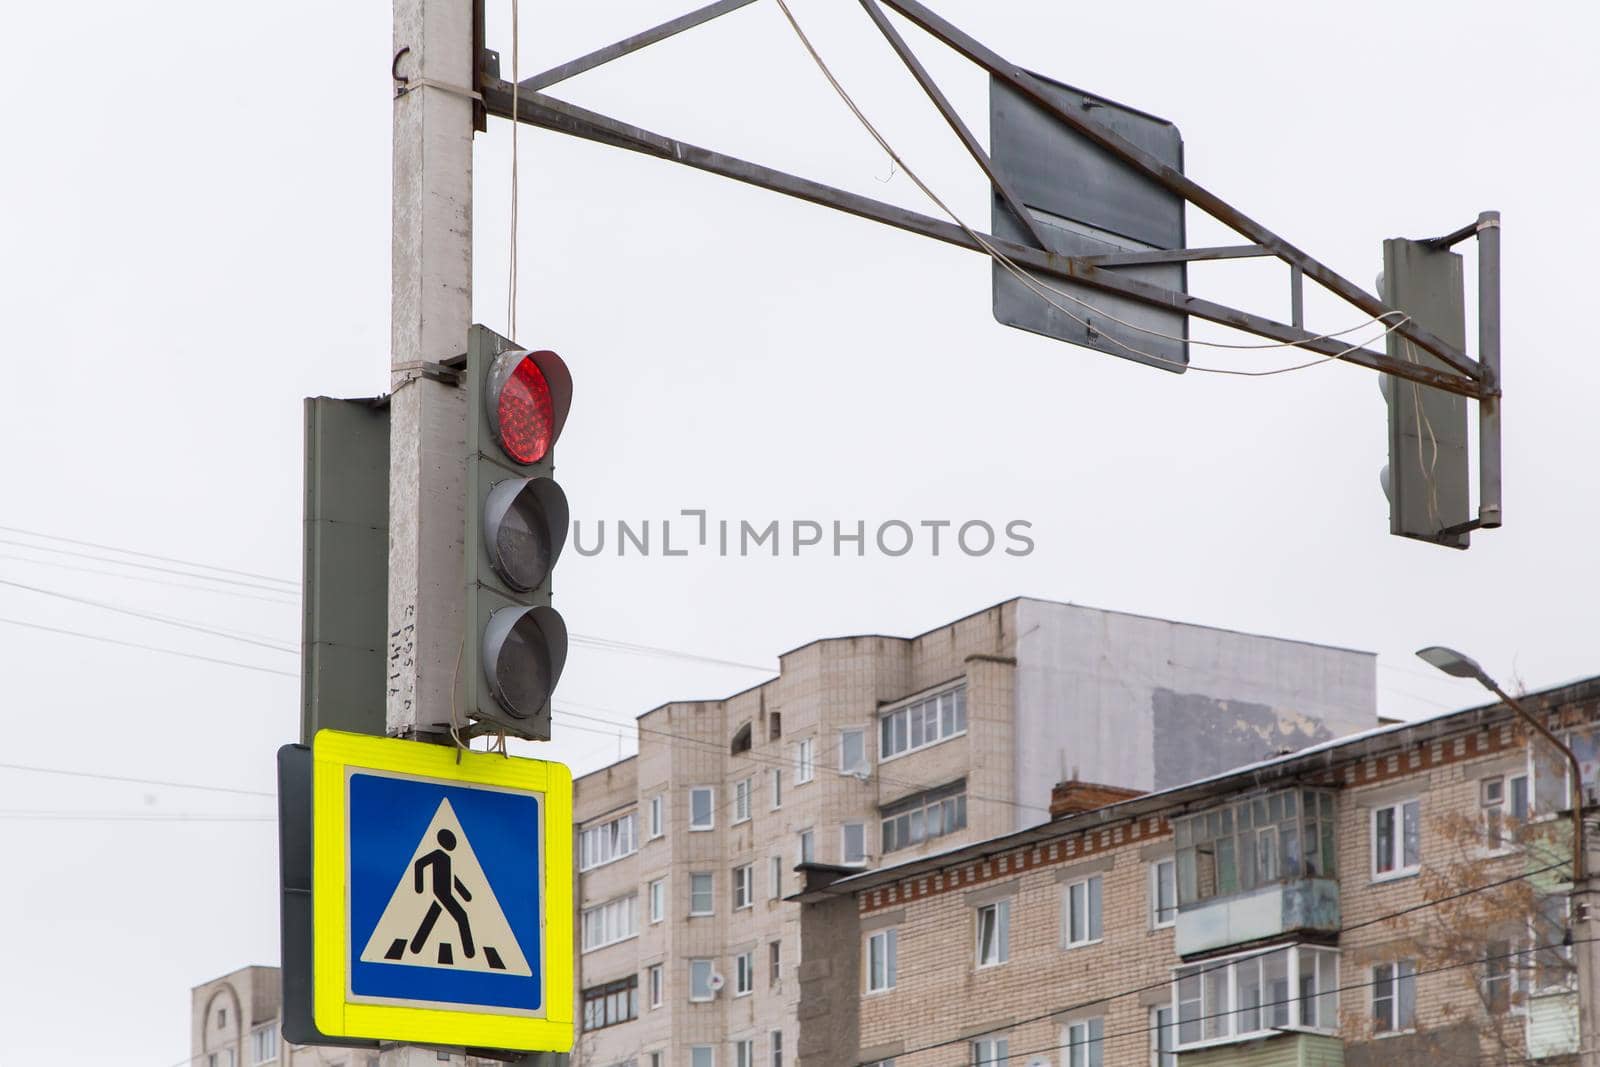 A road sign means a pedestrian crossing, a red traffic light for cars is on. Cars must stop and people can cross the road. Against the background of a gray sky and a residential building.